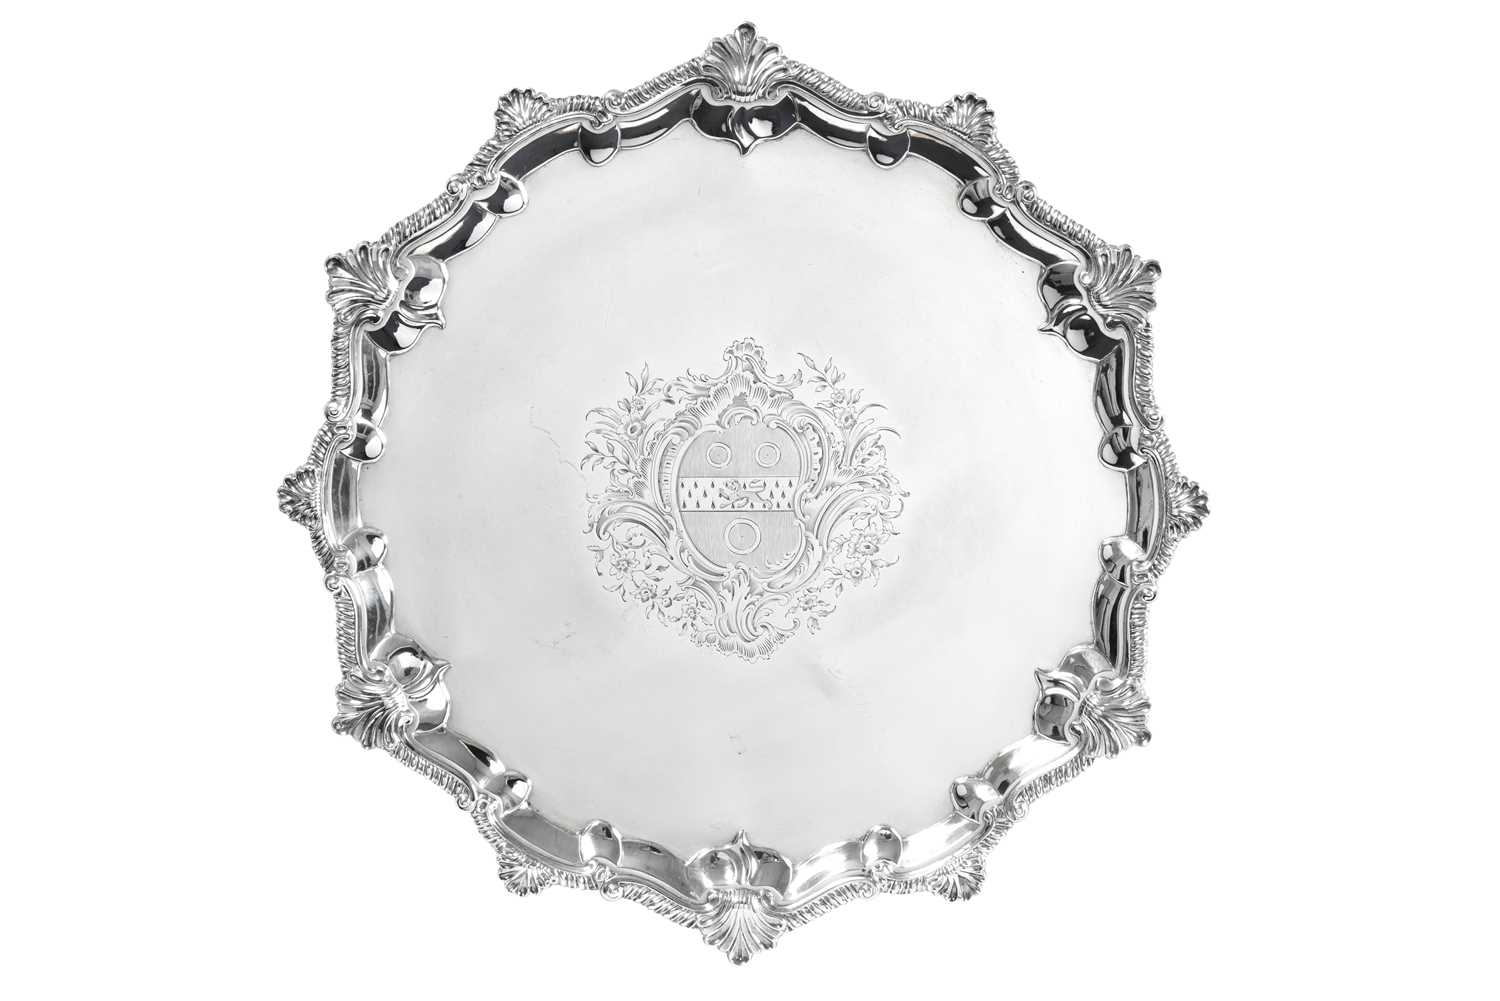 A George III Silver Salver, Probably by Thomas Hannam and Richard Mills, London, 1763